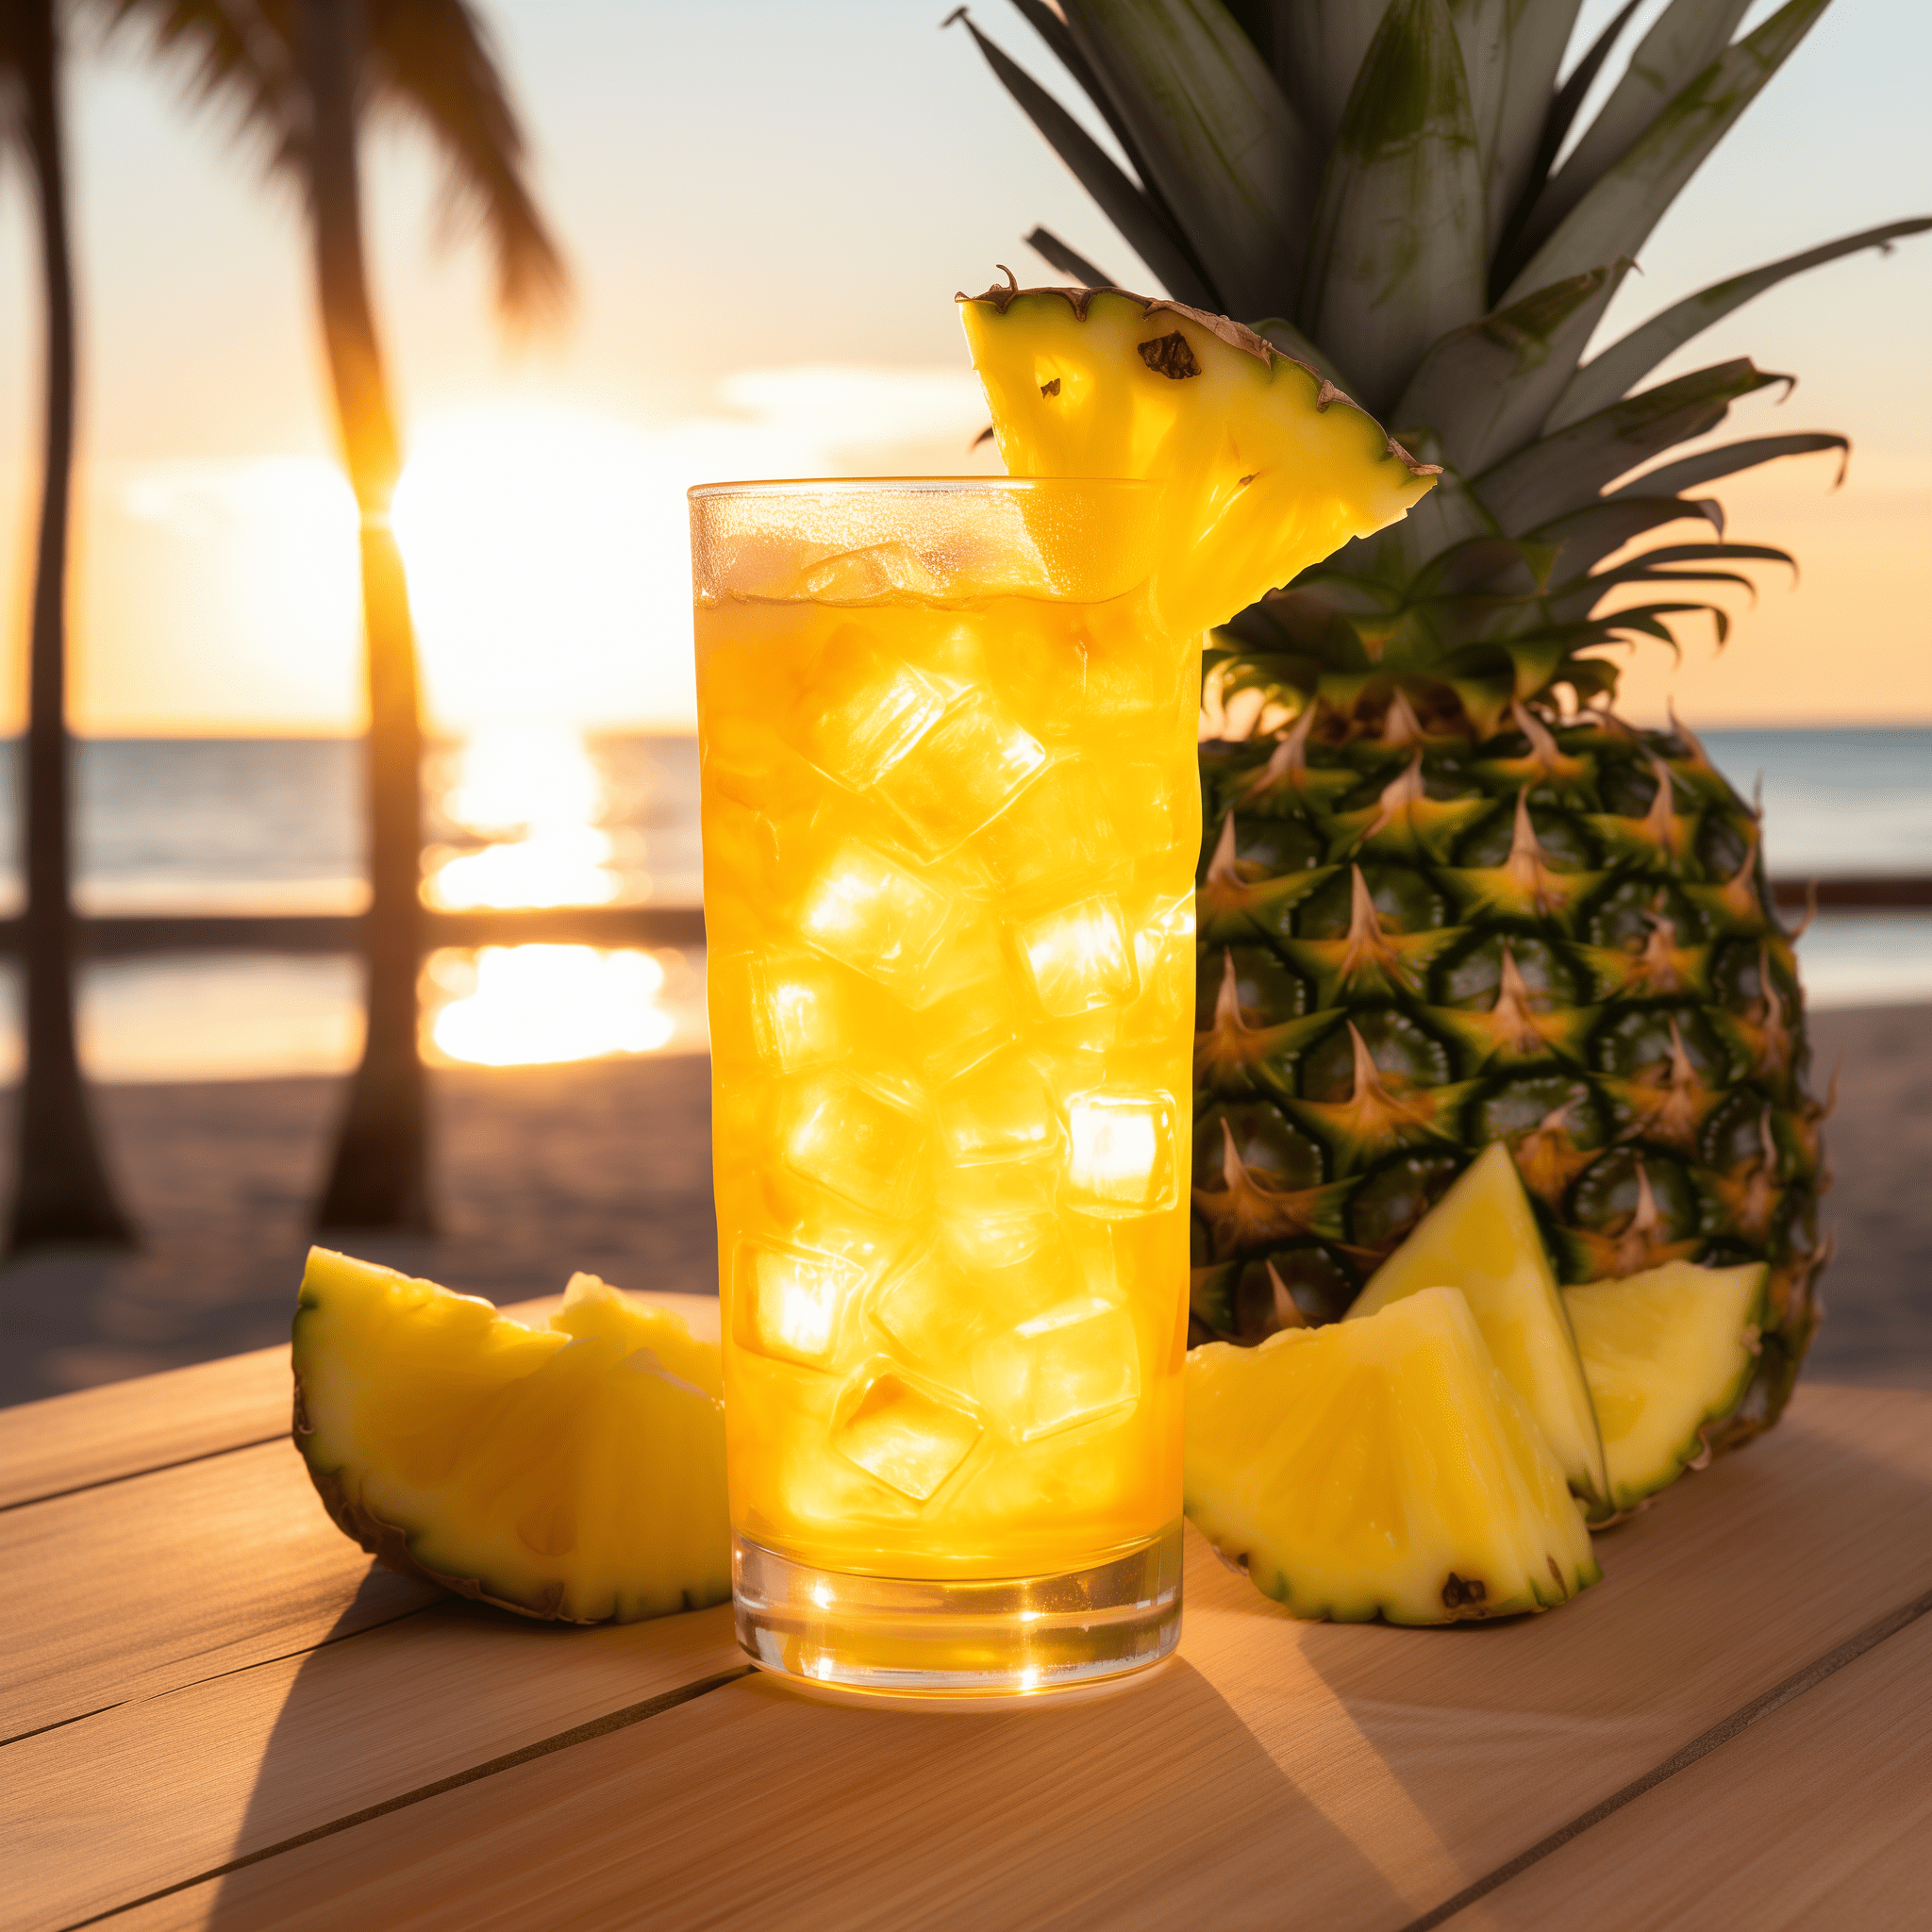 Pinada Cocktail Recipe - The Pinada is a sweet and refreshing cocktail with a tropical flair. The pineapple juice provides a juicy, fruity base, while the rum adds a warm, slightly spicy kick. It's a balanced drink with a creamy texture that's neither too strong nor too light, making it a perfect sipper for those warm evenings.